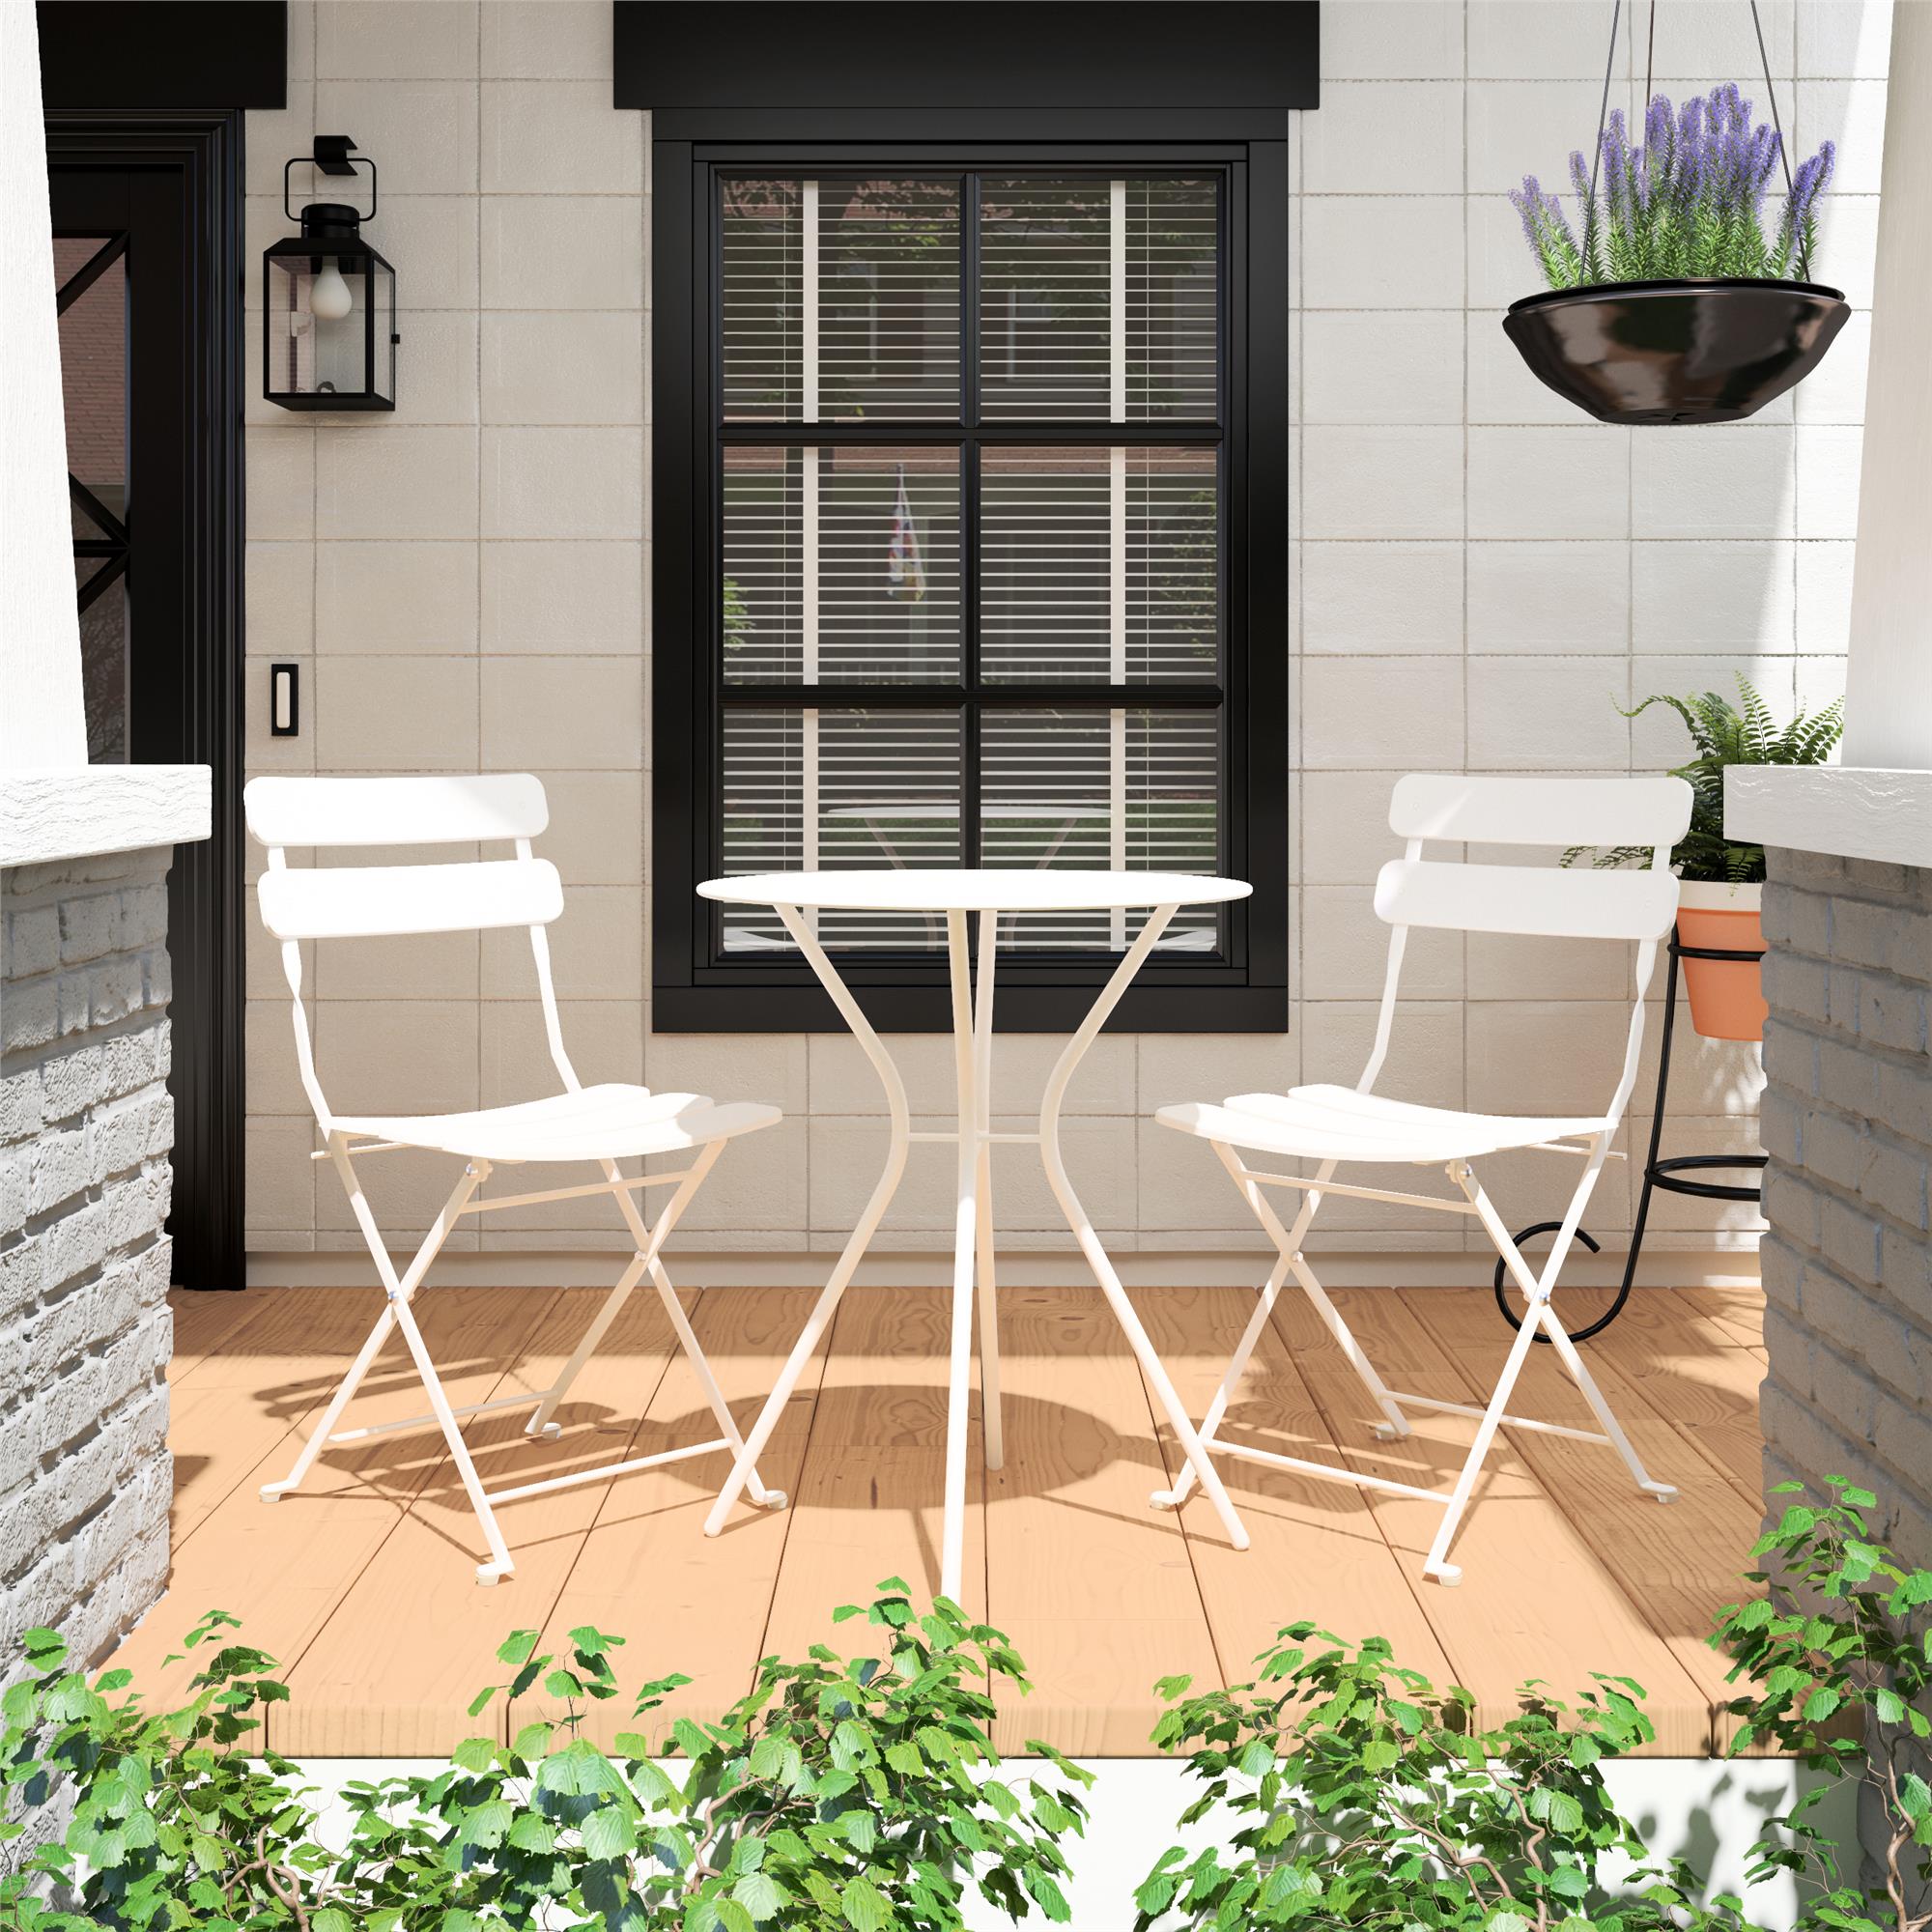 COSCO Outdoor Living, 3 Piece Bistro Set with 2 Folding Chairs, White - image 1 of 7